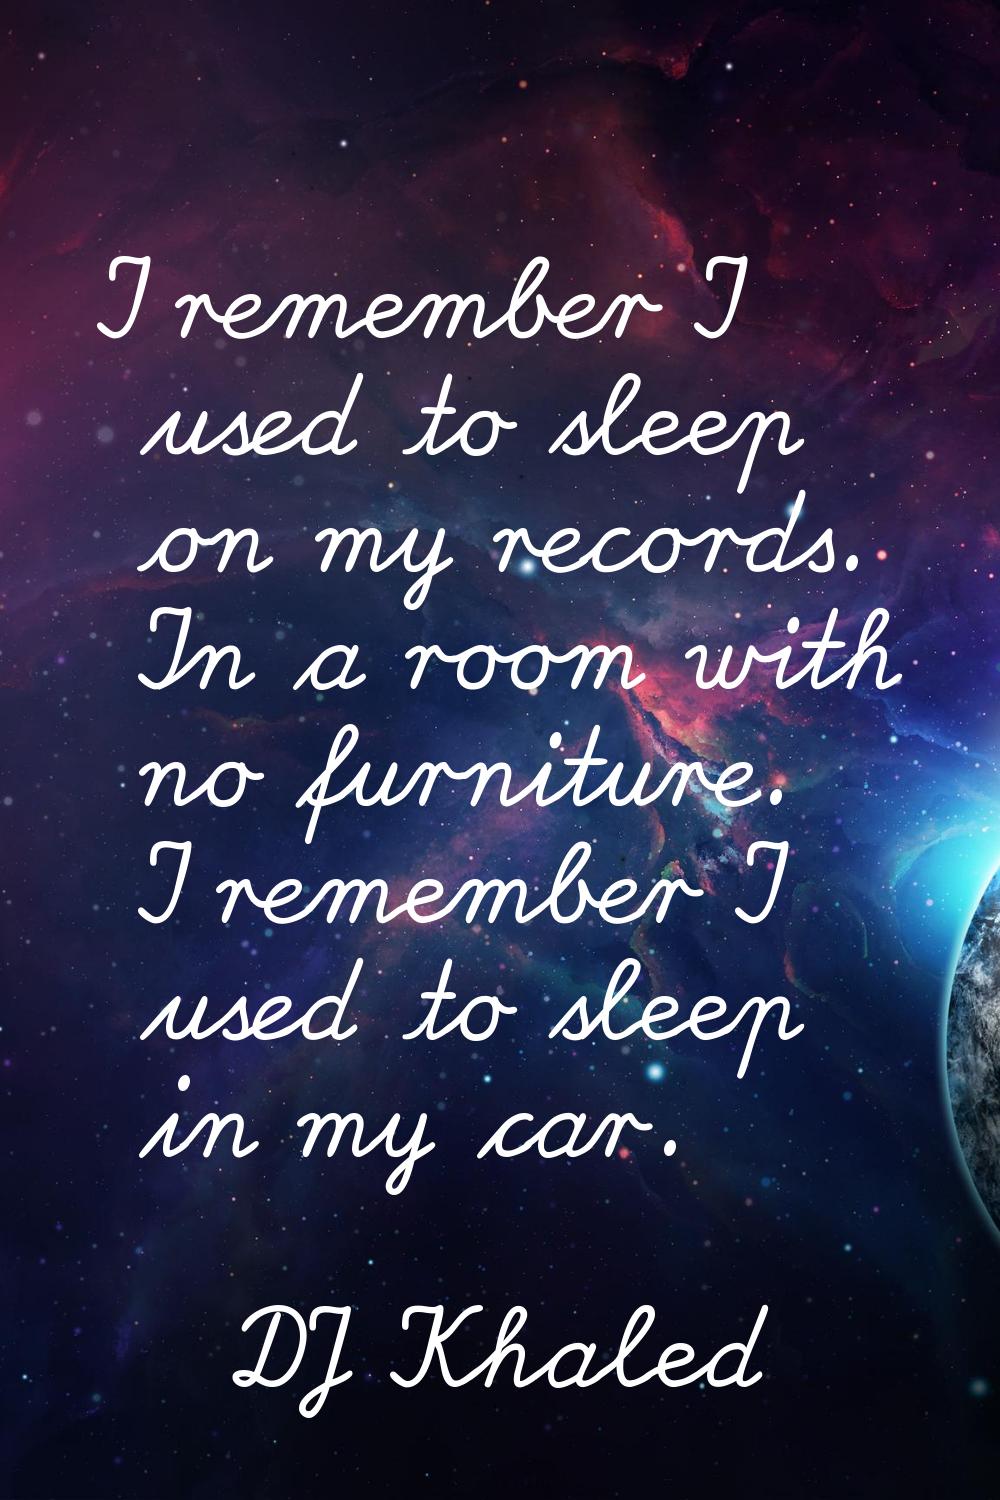 I remember I used to sleep on my records. In a room with no furniture. I remember I used to sleep i